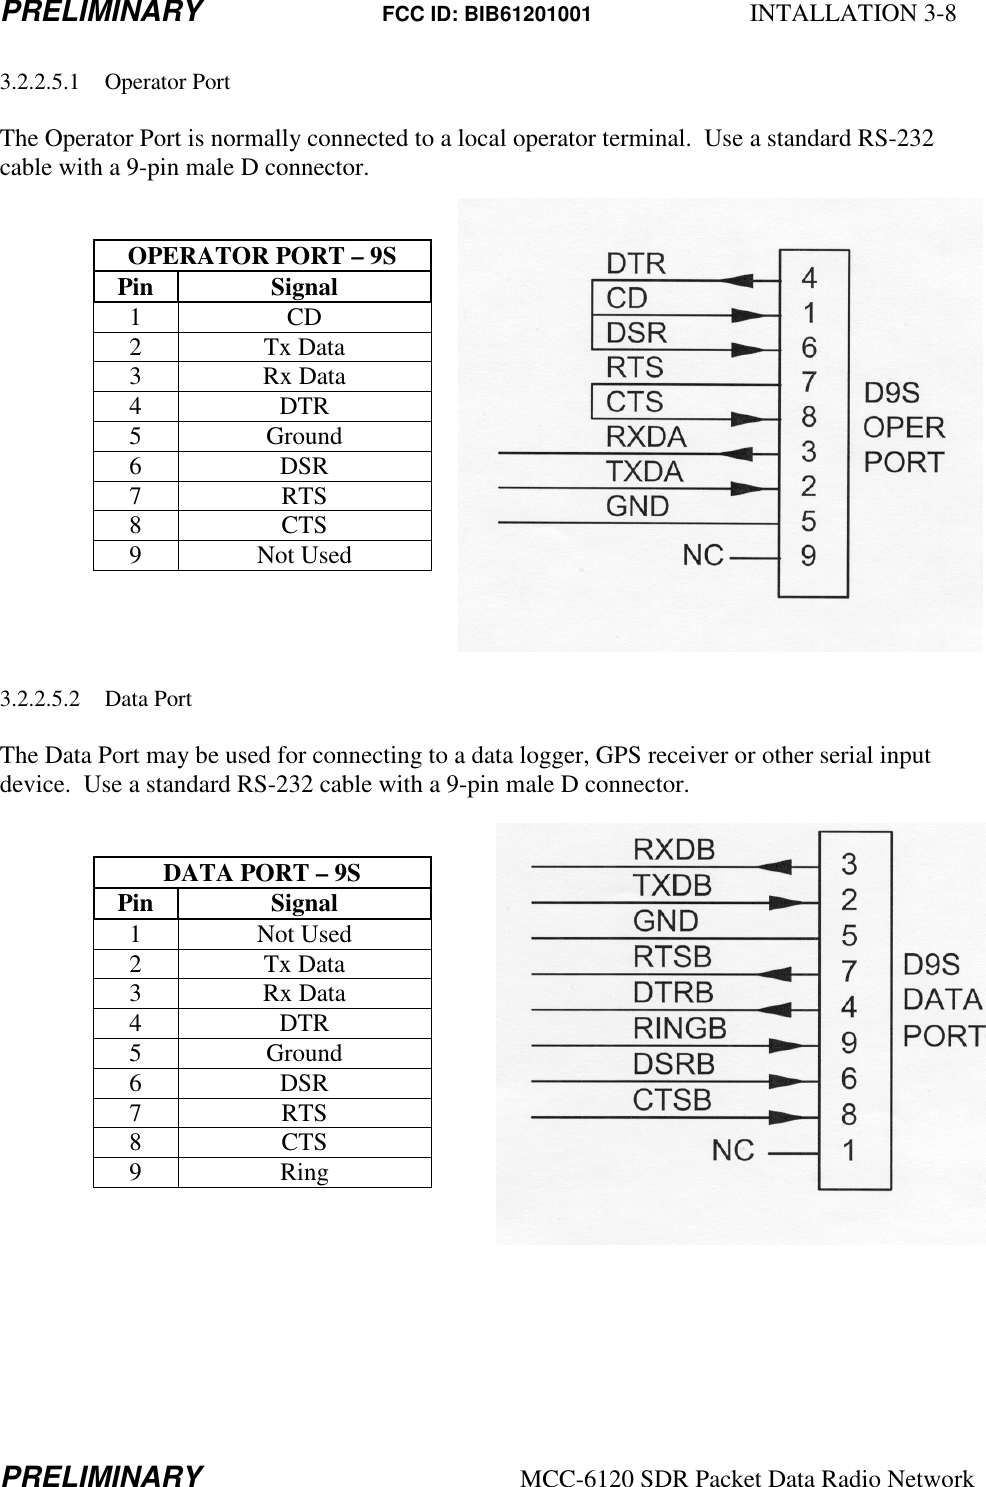 PRELIMINARY FCC ID: BIB61201001  INTALLATION 3-8  PRELIMINARY  MCC-6120 SDR Packet Data Radio Network 3.2.2.5.1 Operator Port  The Operator Port is normally connected to a local operator terminal.  Use a standard RS-232 cable with a 9-pin male D connector.   OPERATOR PORT – 9S Pin  Signal 1  CD  2  Tx Data  3  Rx Data  4  DTR  5  Ground 6  DSR 7  RTS  8  CTS  9  Not Used     3.2.2.5.2 Data Port  The Data Port may be used for connecting to a data logger, GPS receiver or other serial input device.  Use a standard RS-232 cable with a 9-pin male D connector.   DATA PORT – 9S Pin  Signal 1  Not Used 2  Tx Data  3  Rx Data  4  DTR  5  Ground 6  DSR  7  RTS  8  CTS  9  Ring     